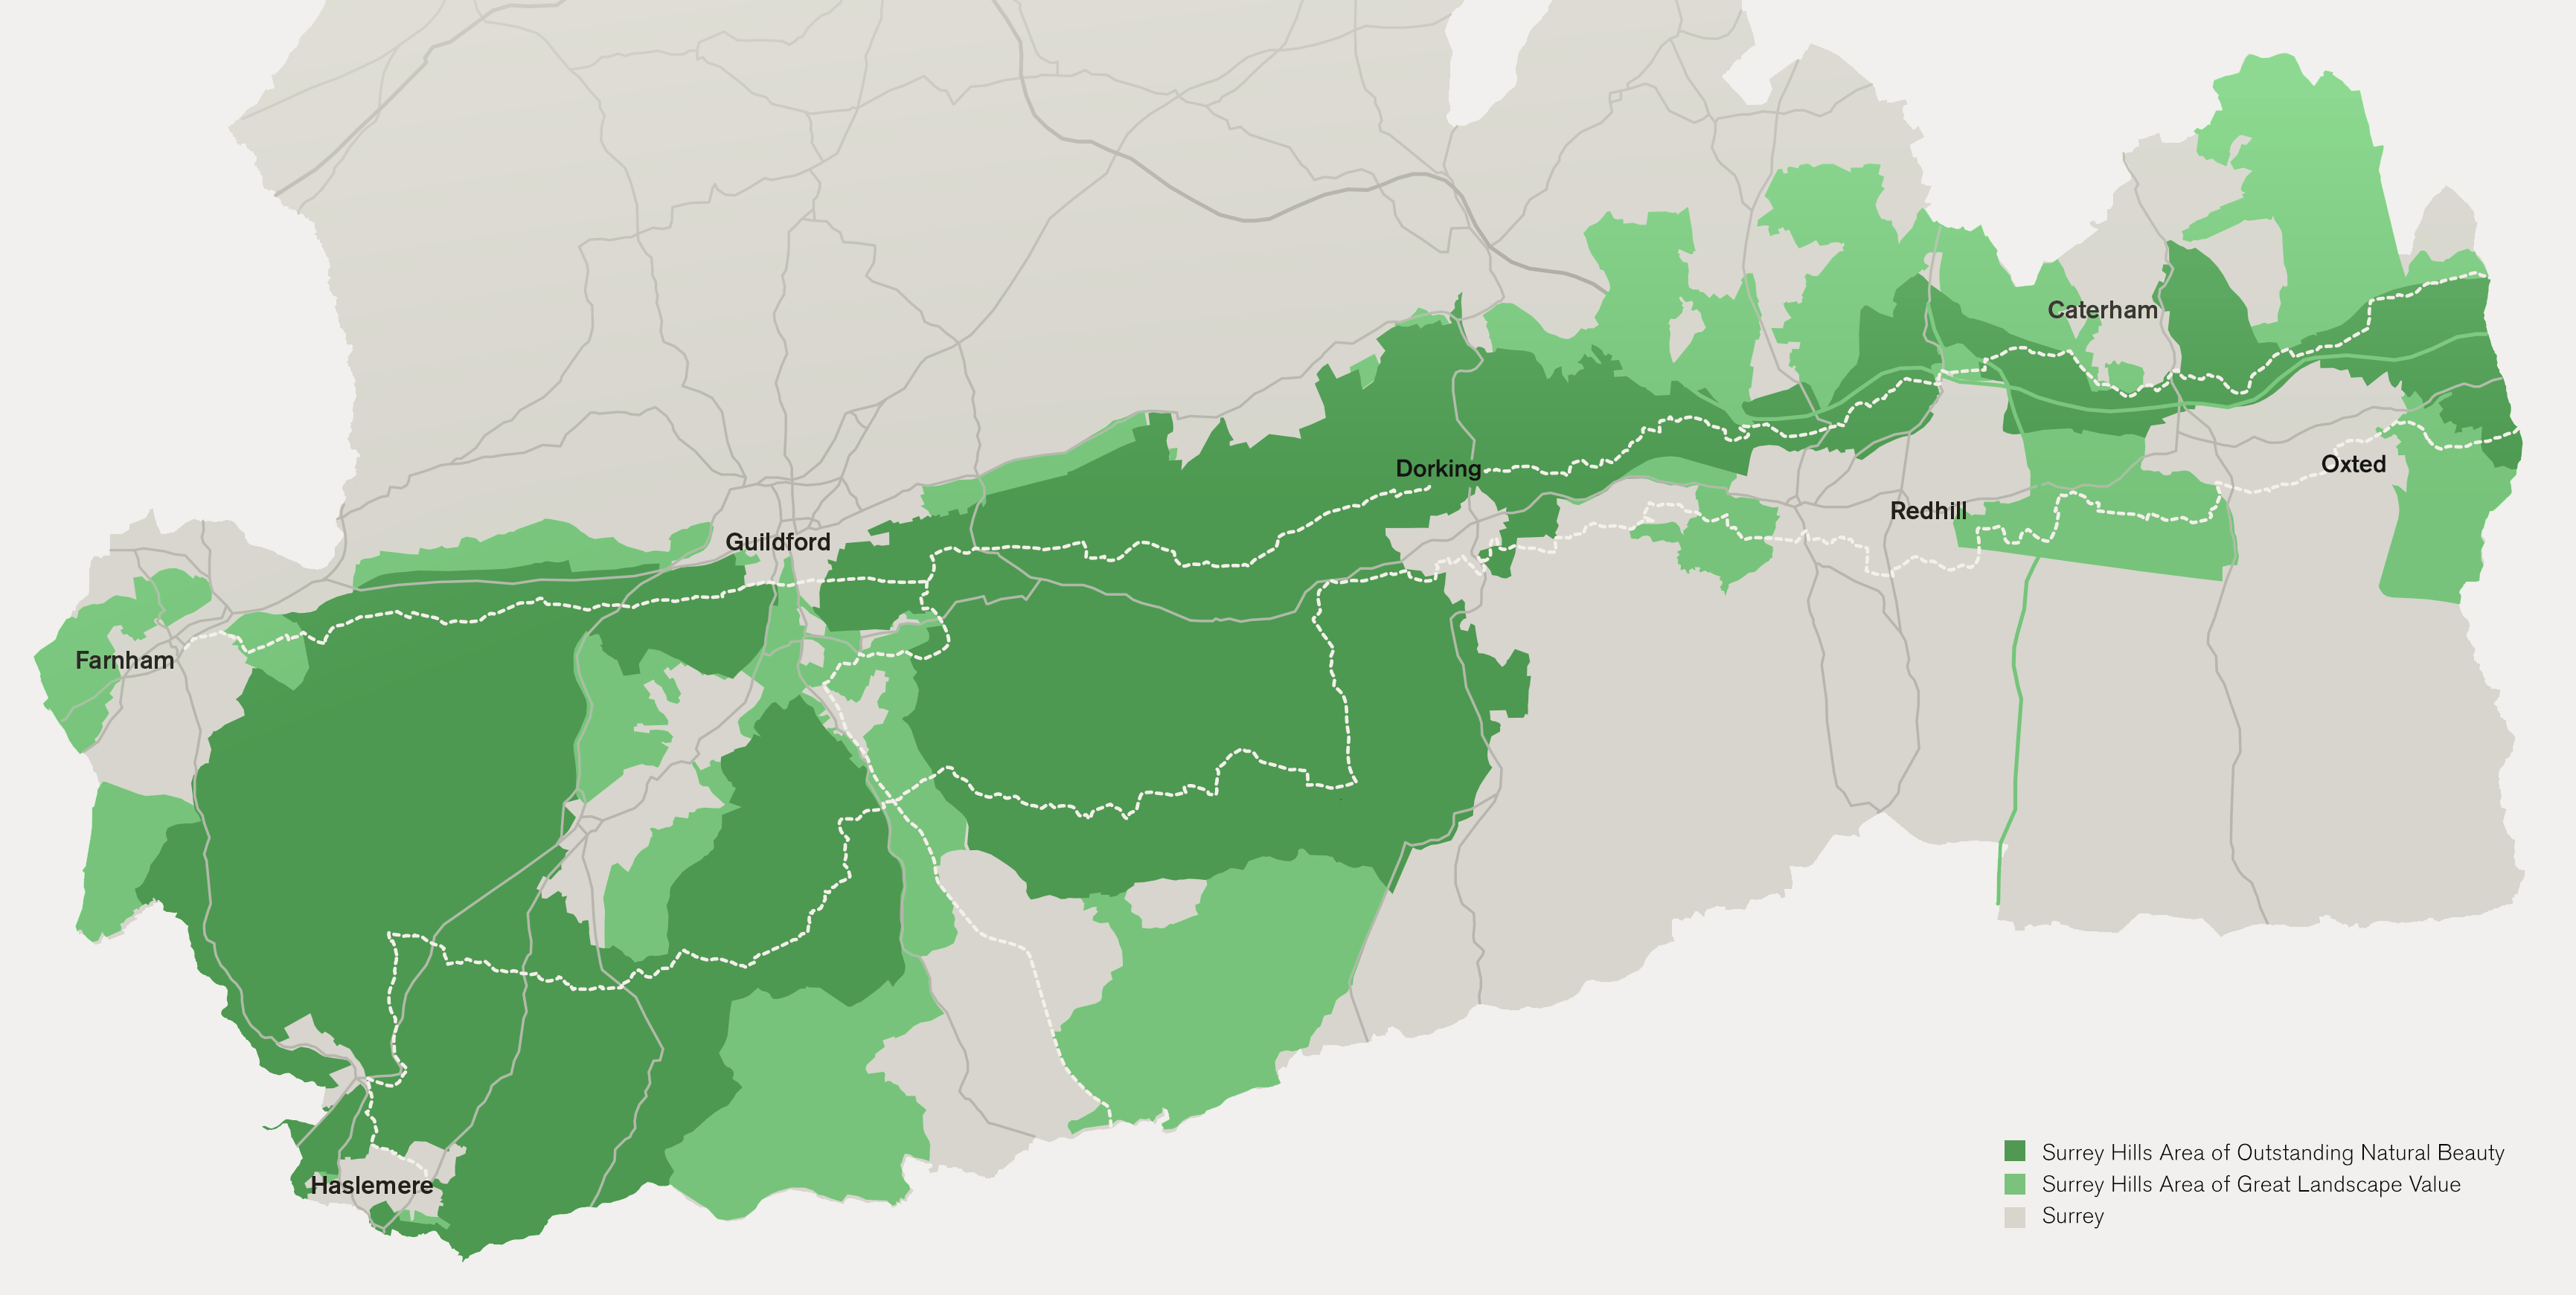 Map of the Surrey Hills Area of Outstanding Natural Beauty, England